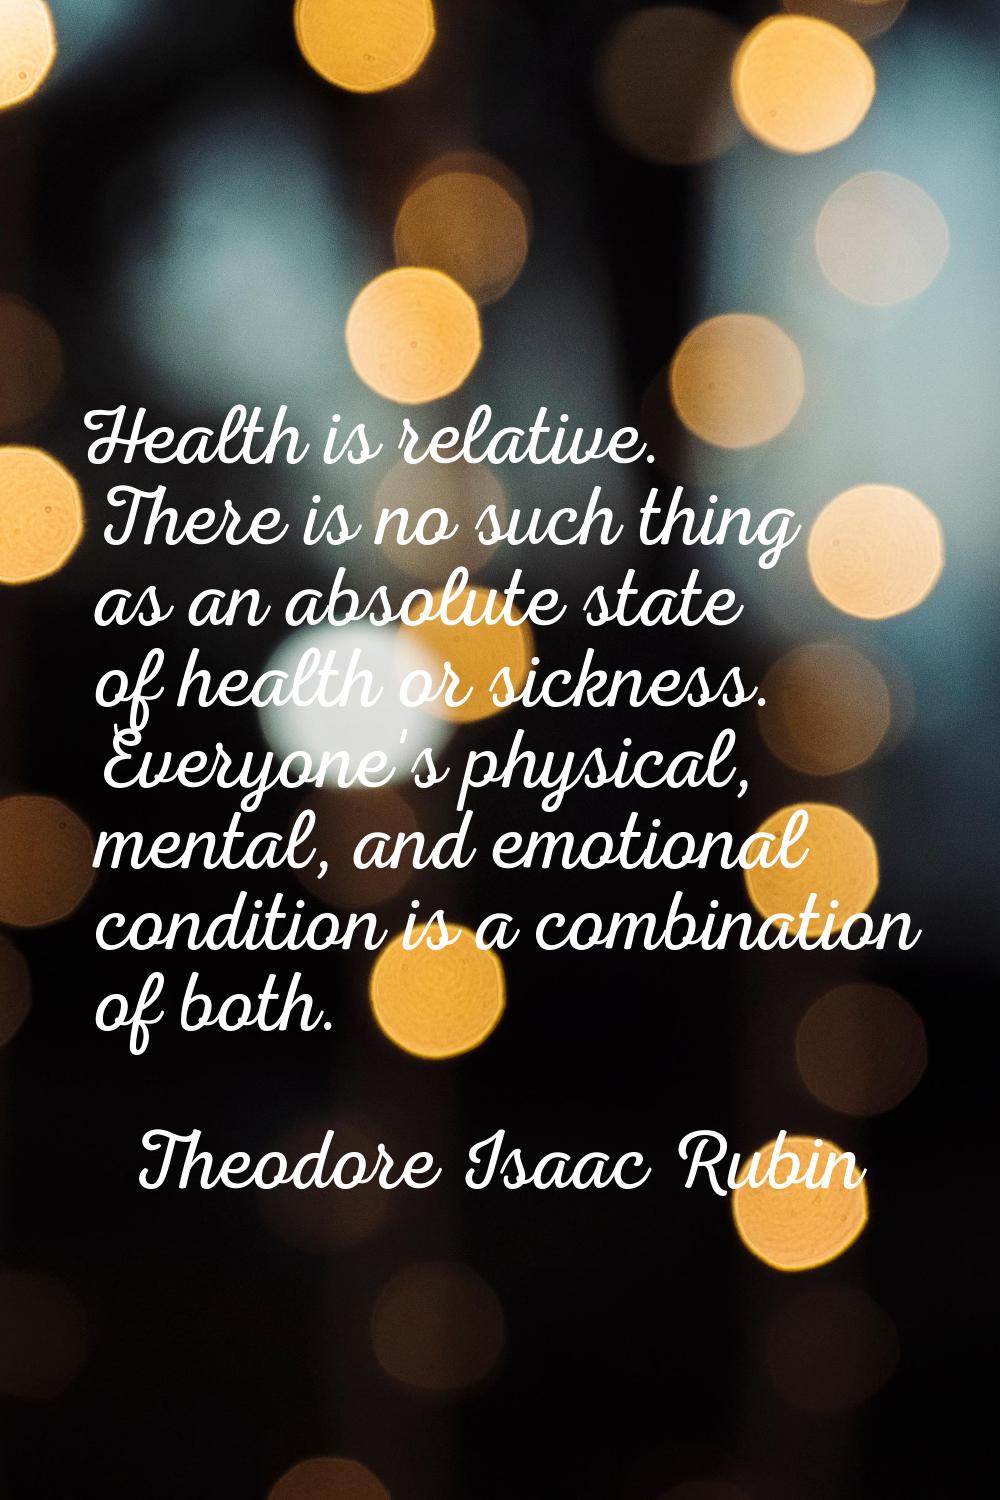 Health is relative. There is no such thing as an absolute state of health or sickness. Everyone's p